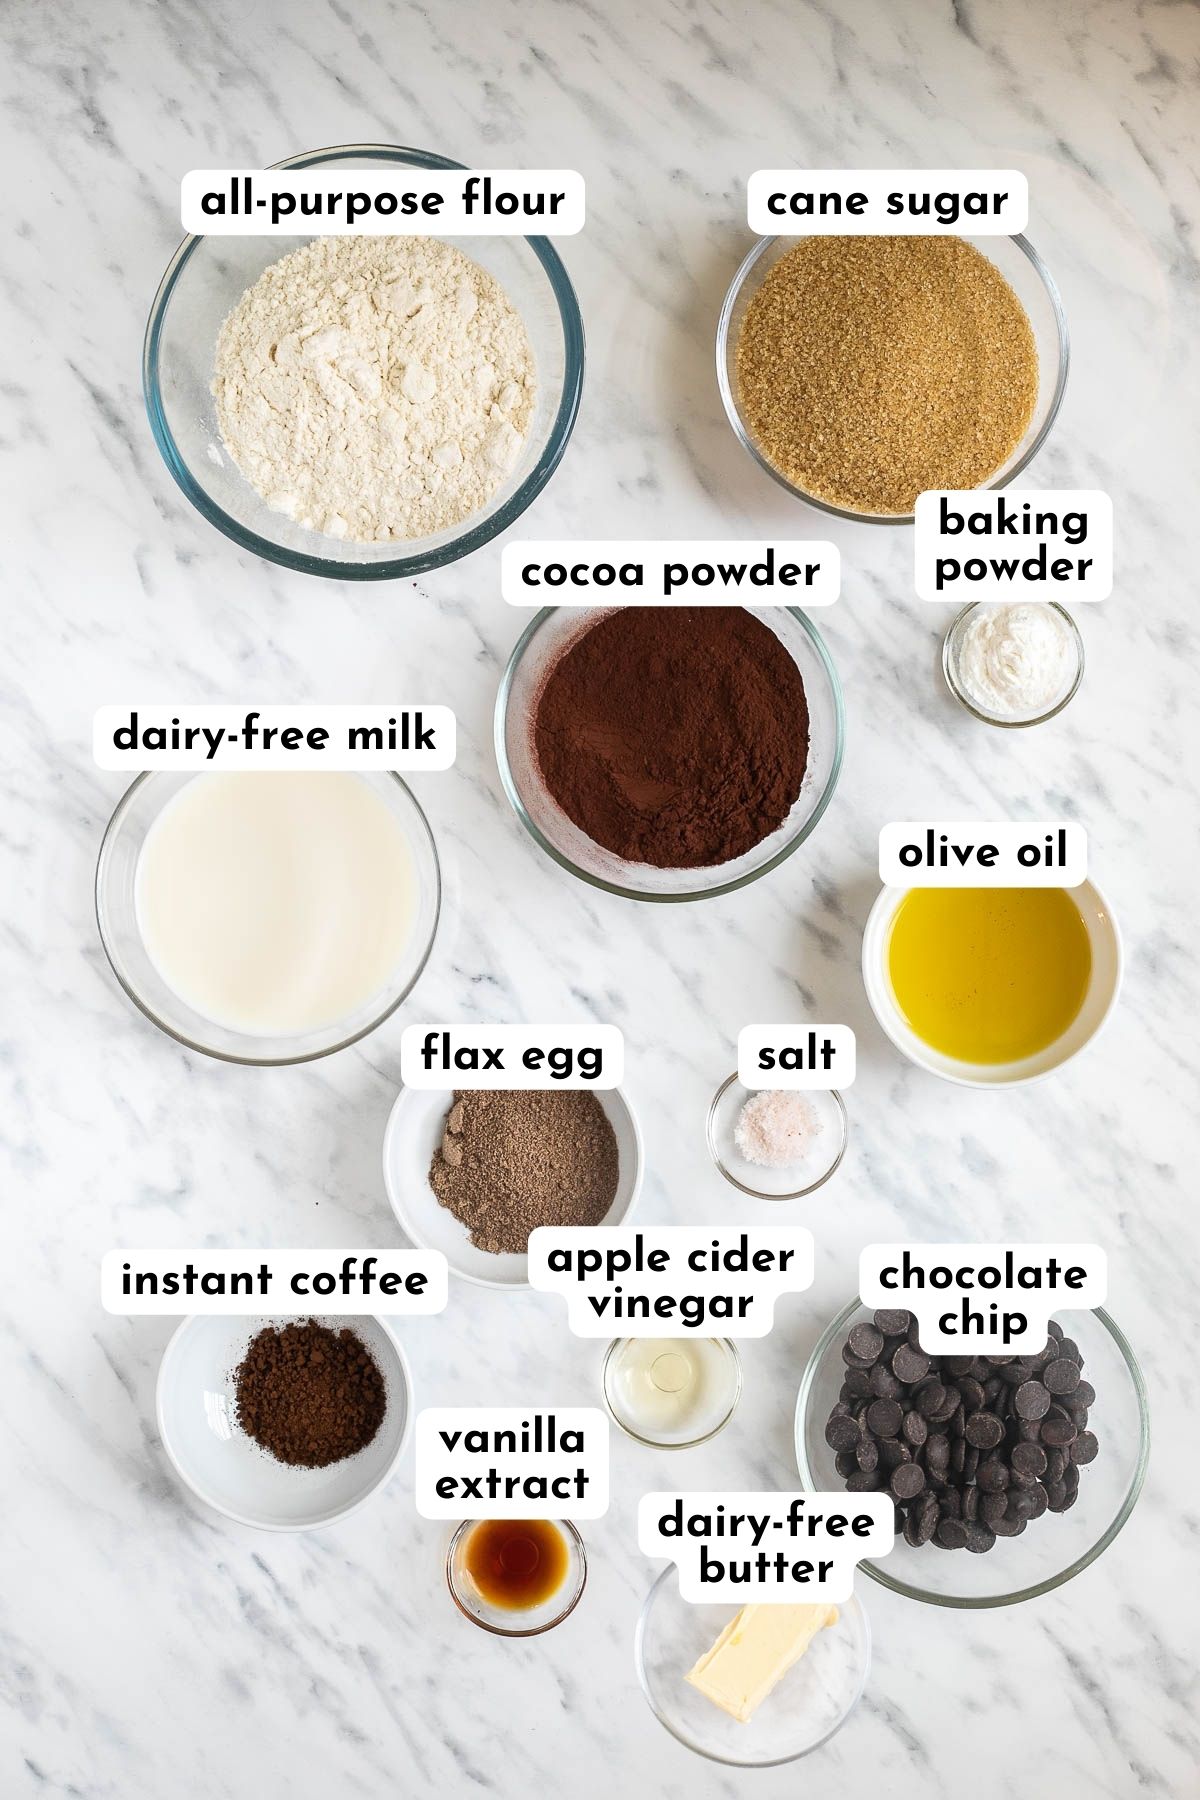 Ingredients of vegan chocolate muffins in small bowls like flour, sugar, baking powder, cocoa powder, milk, oil, chocolate chips, flax egg, salt, instant coffee, vanilla extract, and salt.